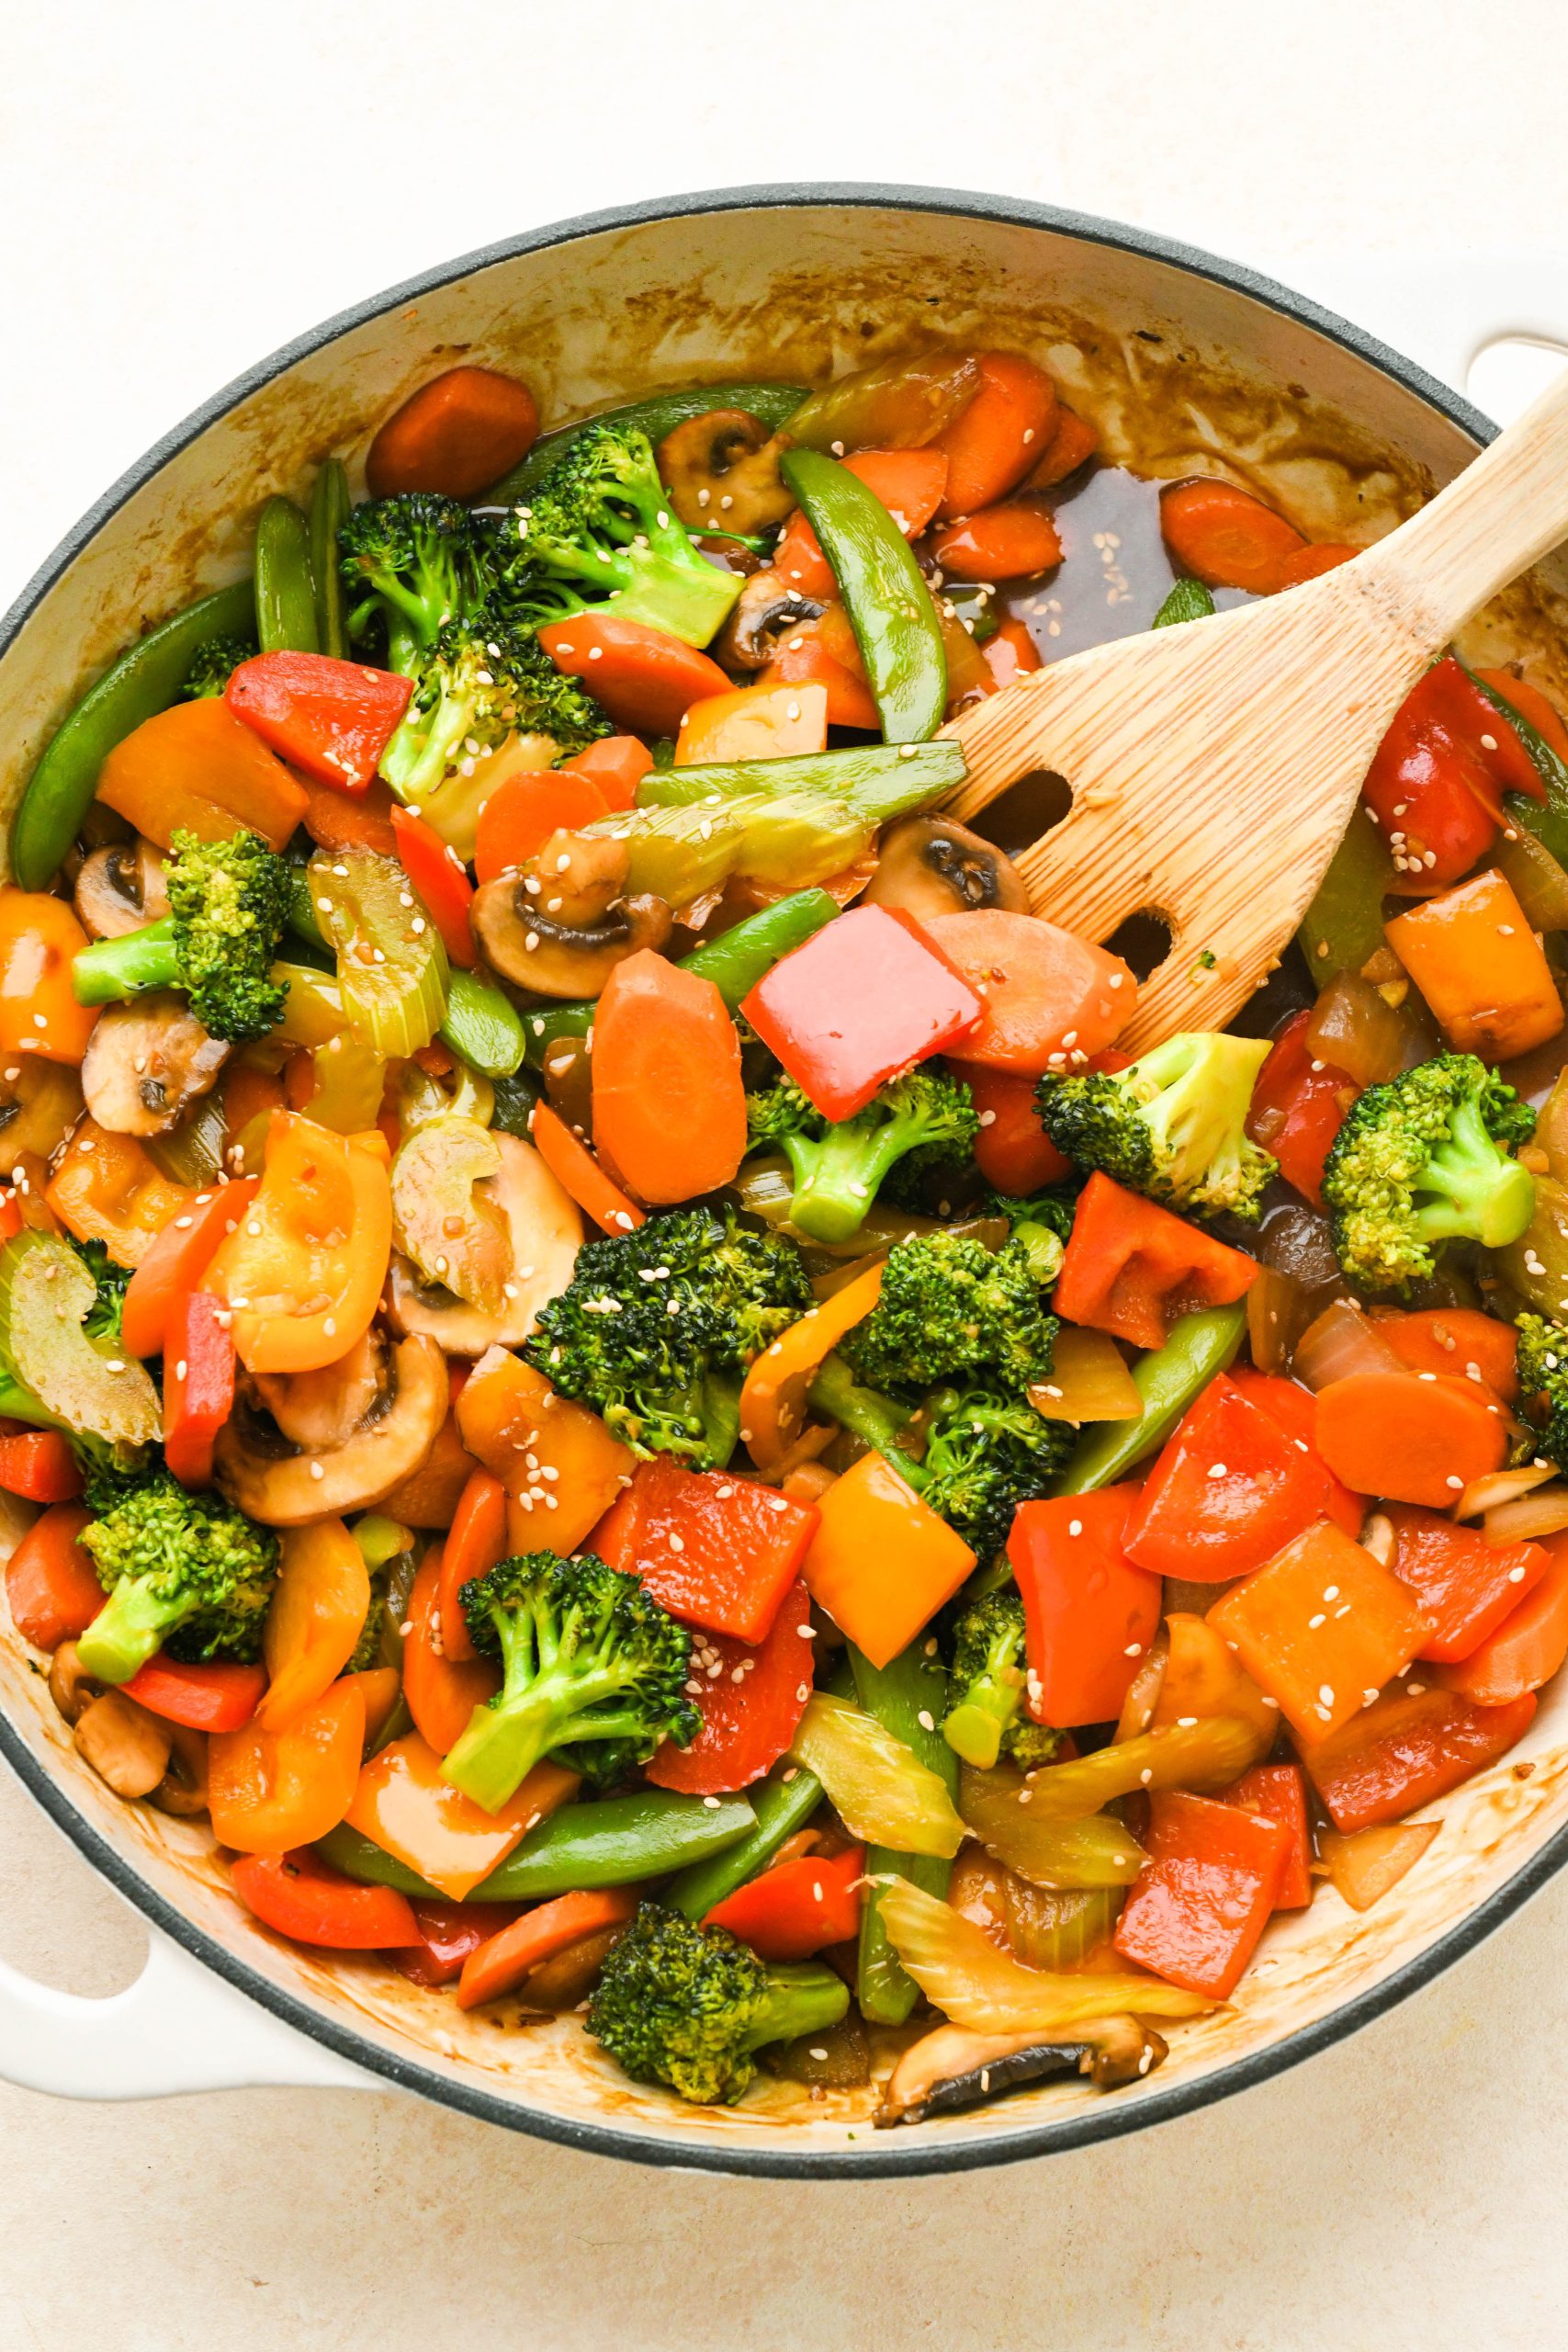 How to make easy veggie stir fry: Finished vegetable stir fry topped with sesame seeds.